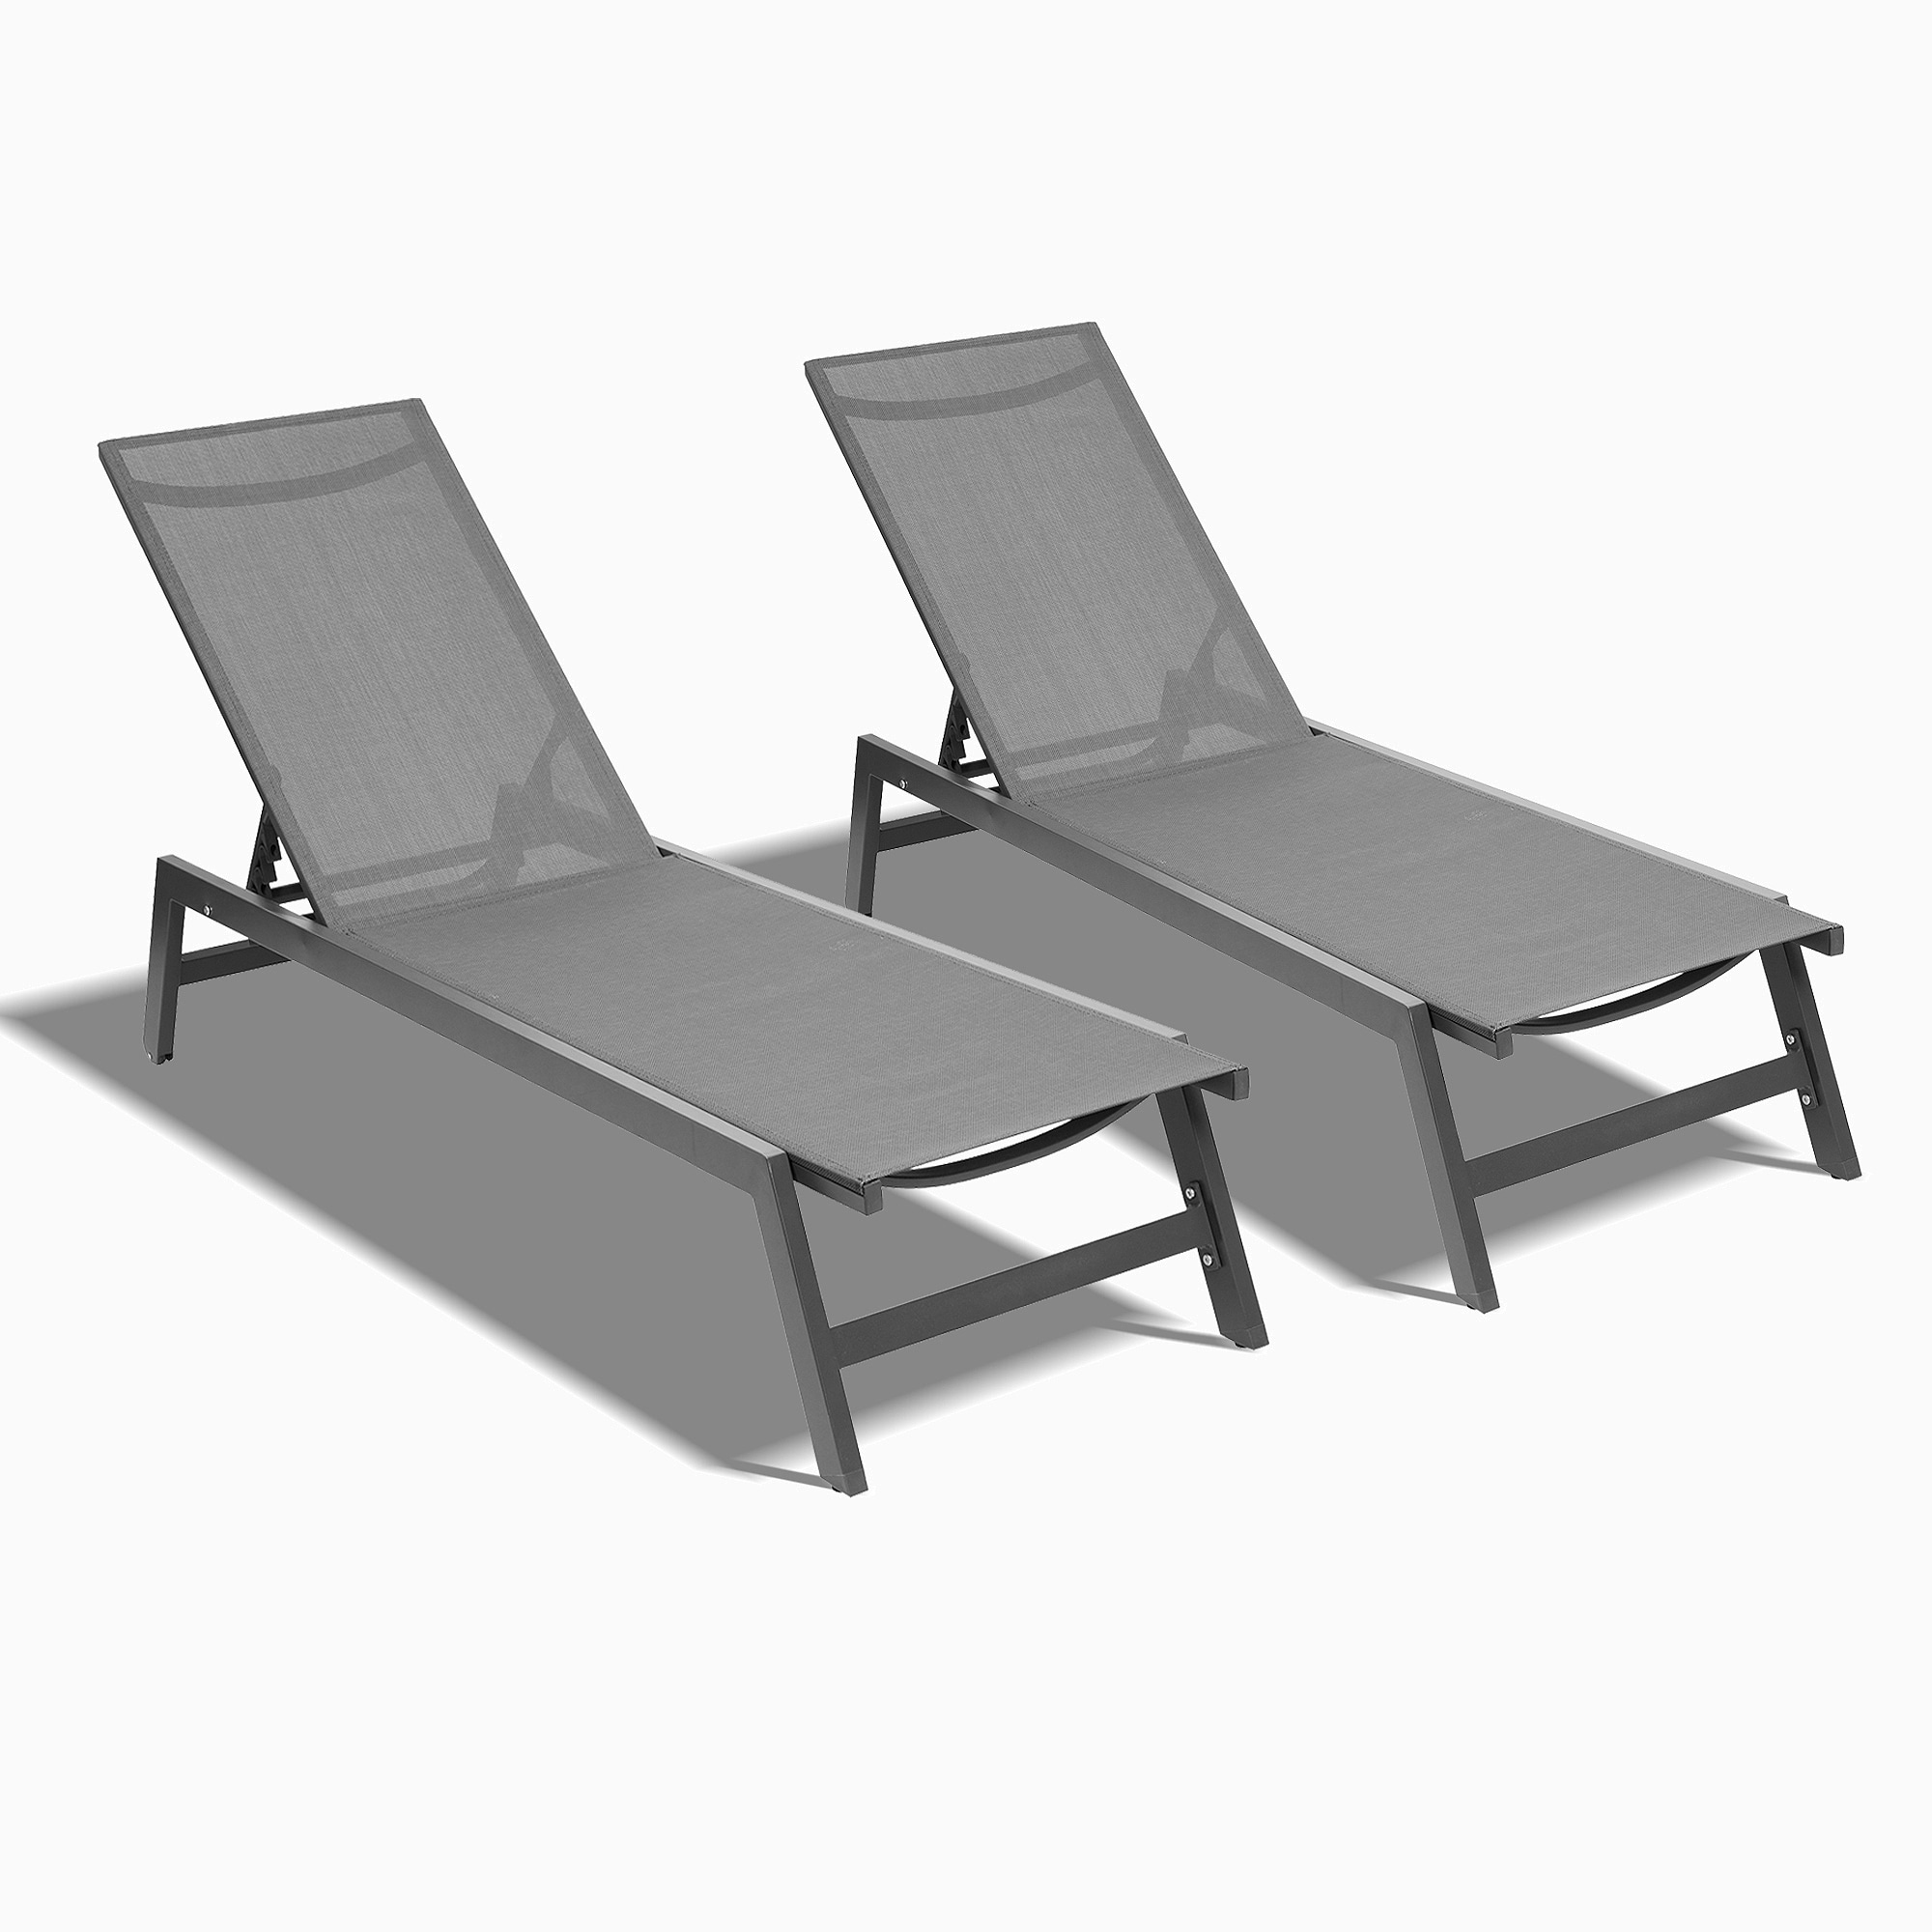 2 Piece Set Chaise Lounge Chairs  All Weather Adjustable Aluminum Recliner